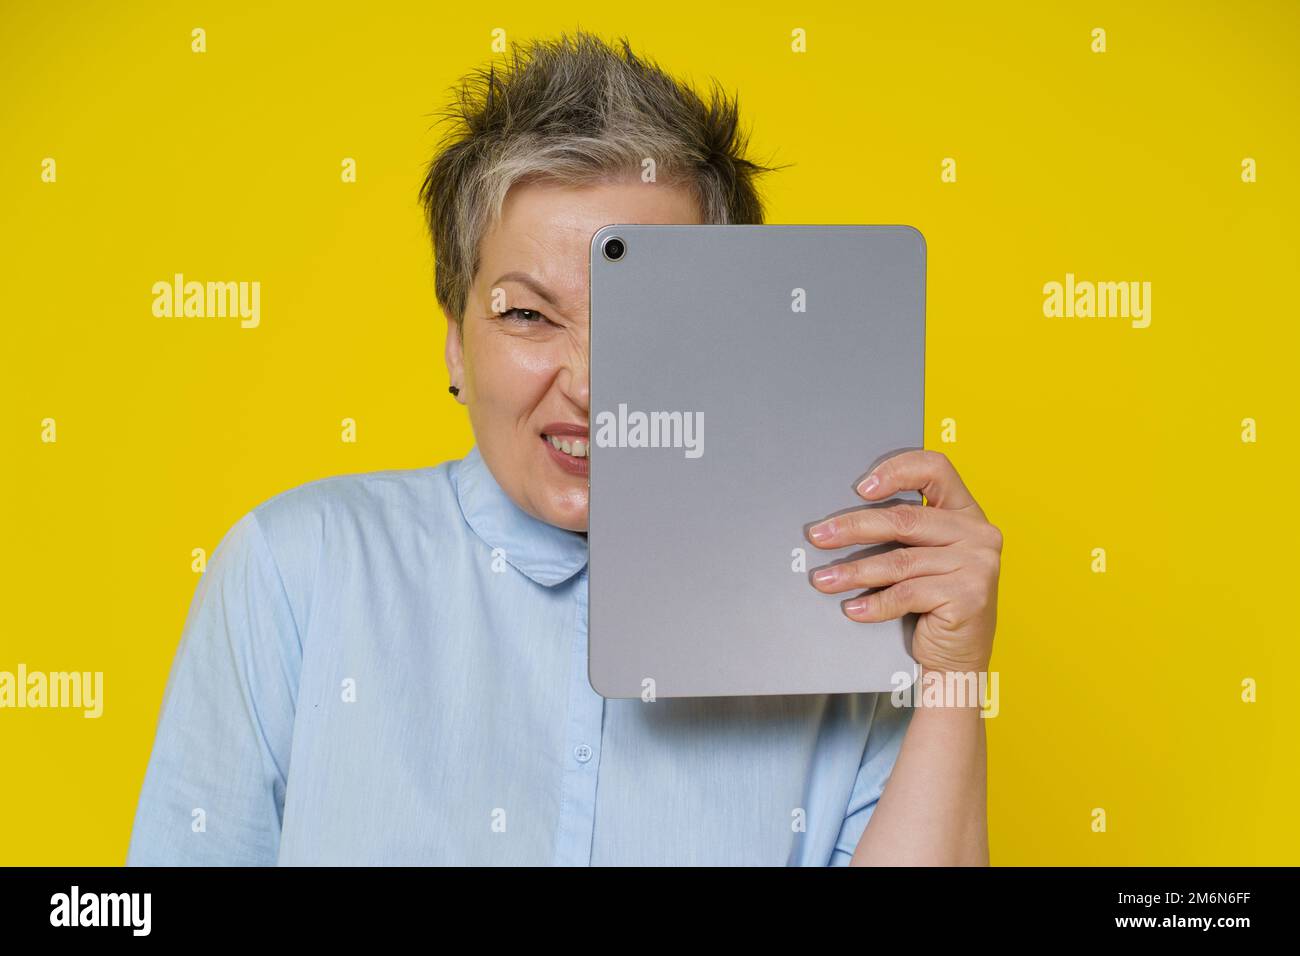 Online troll mature woman hide behind digital tablet with evil facial expression isolated on yellow background. Modern senior wo Stock Photo